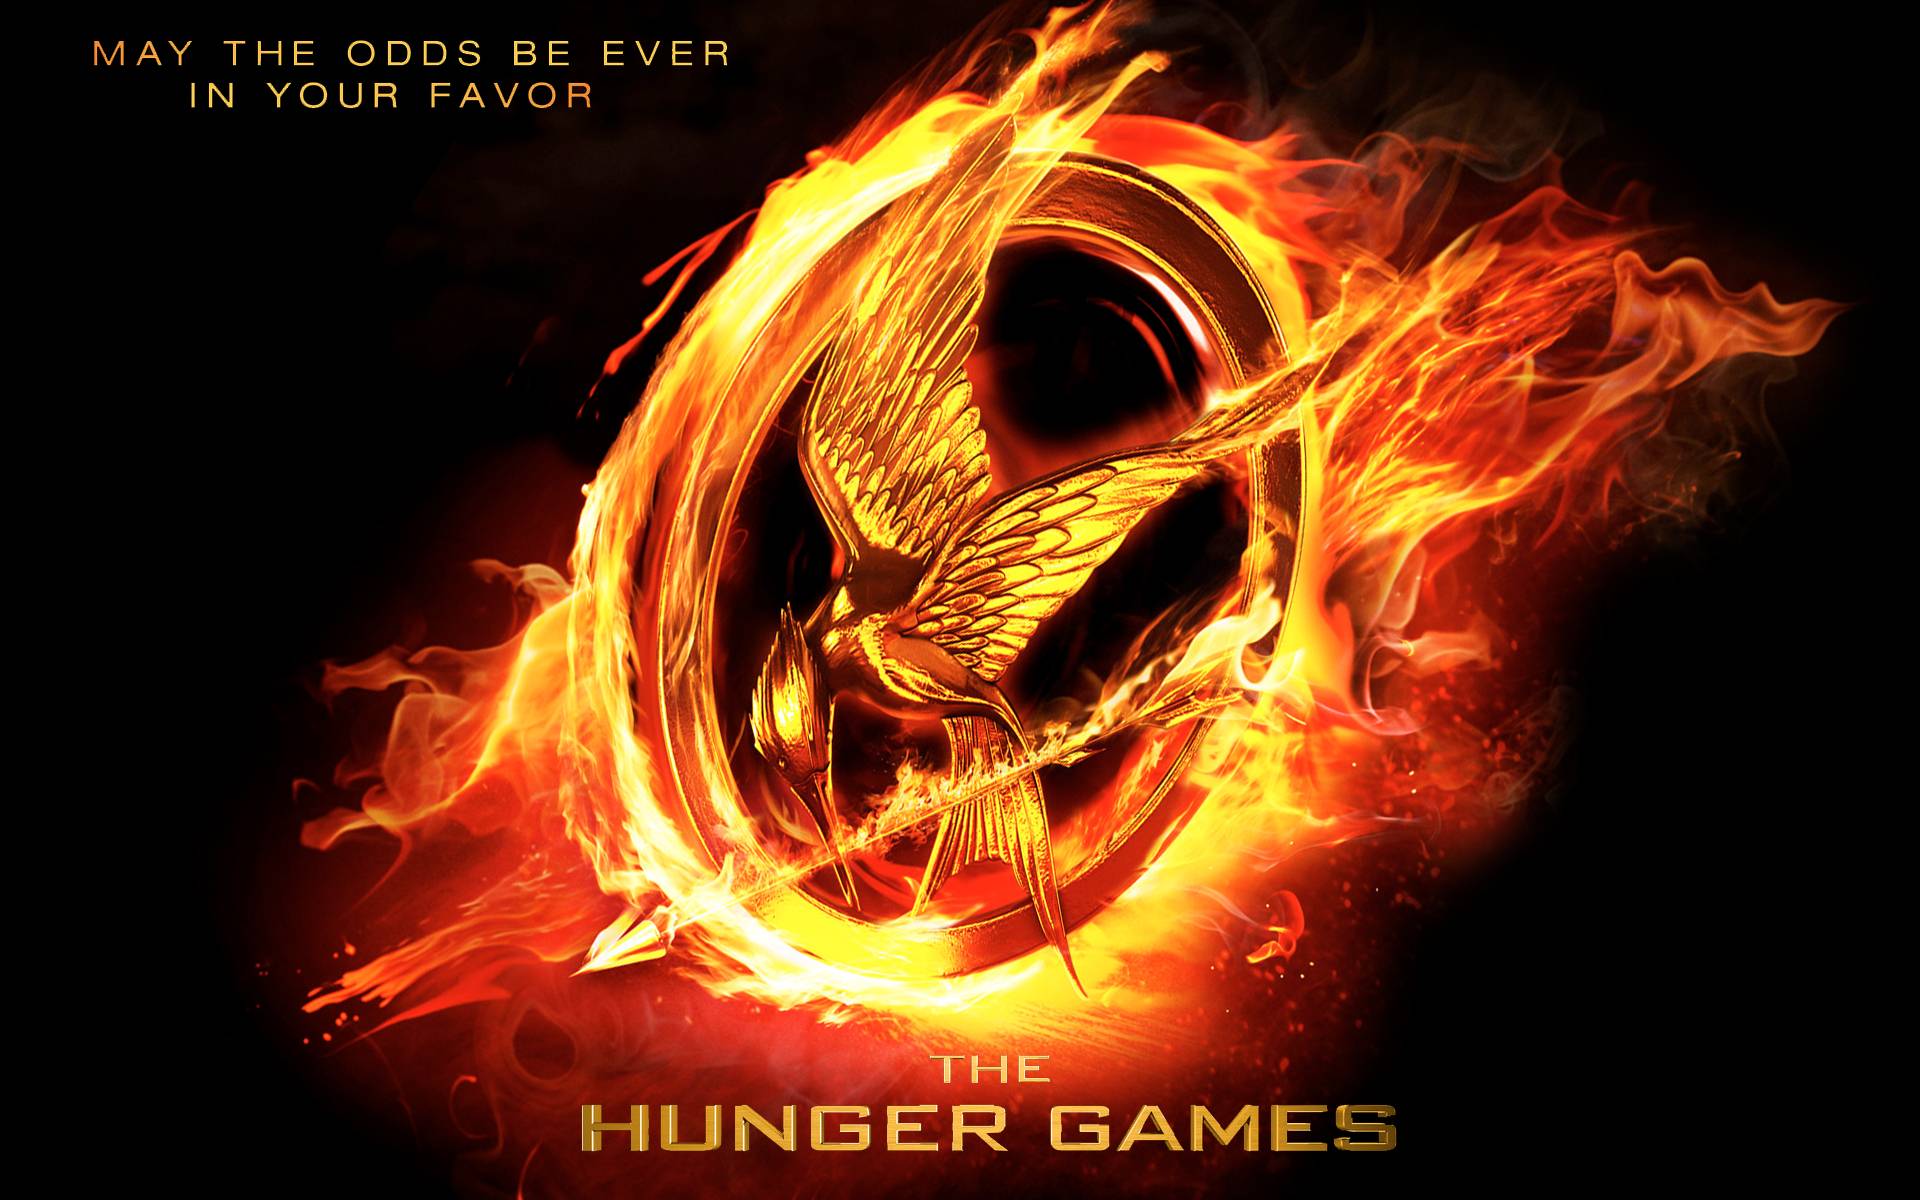 the hunger games HD wallpaper. Your Geeky Wallpaper